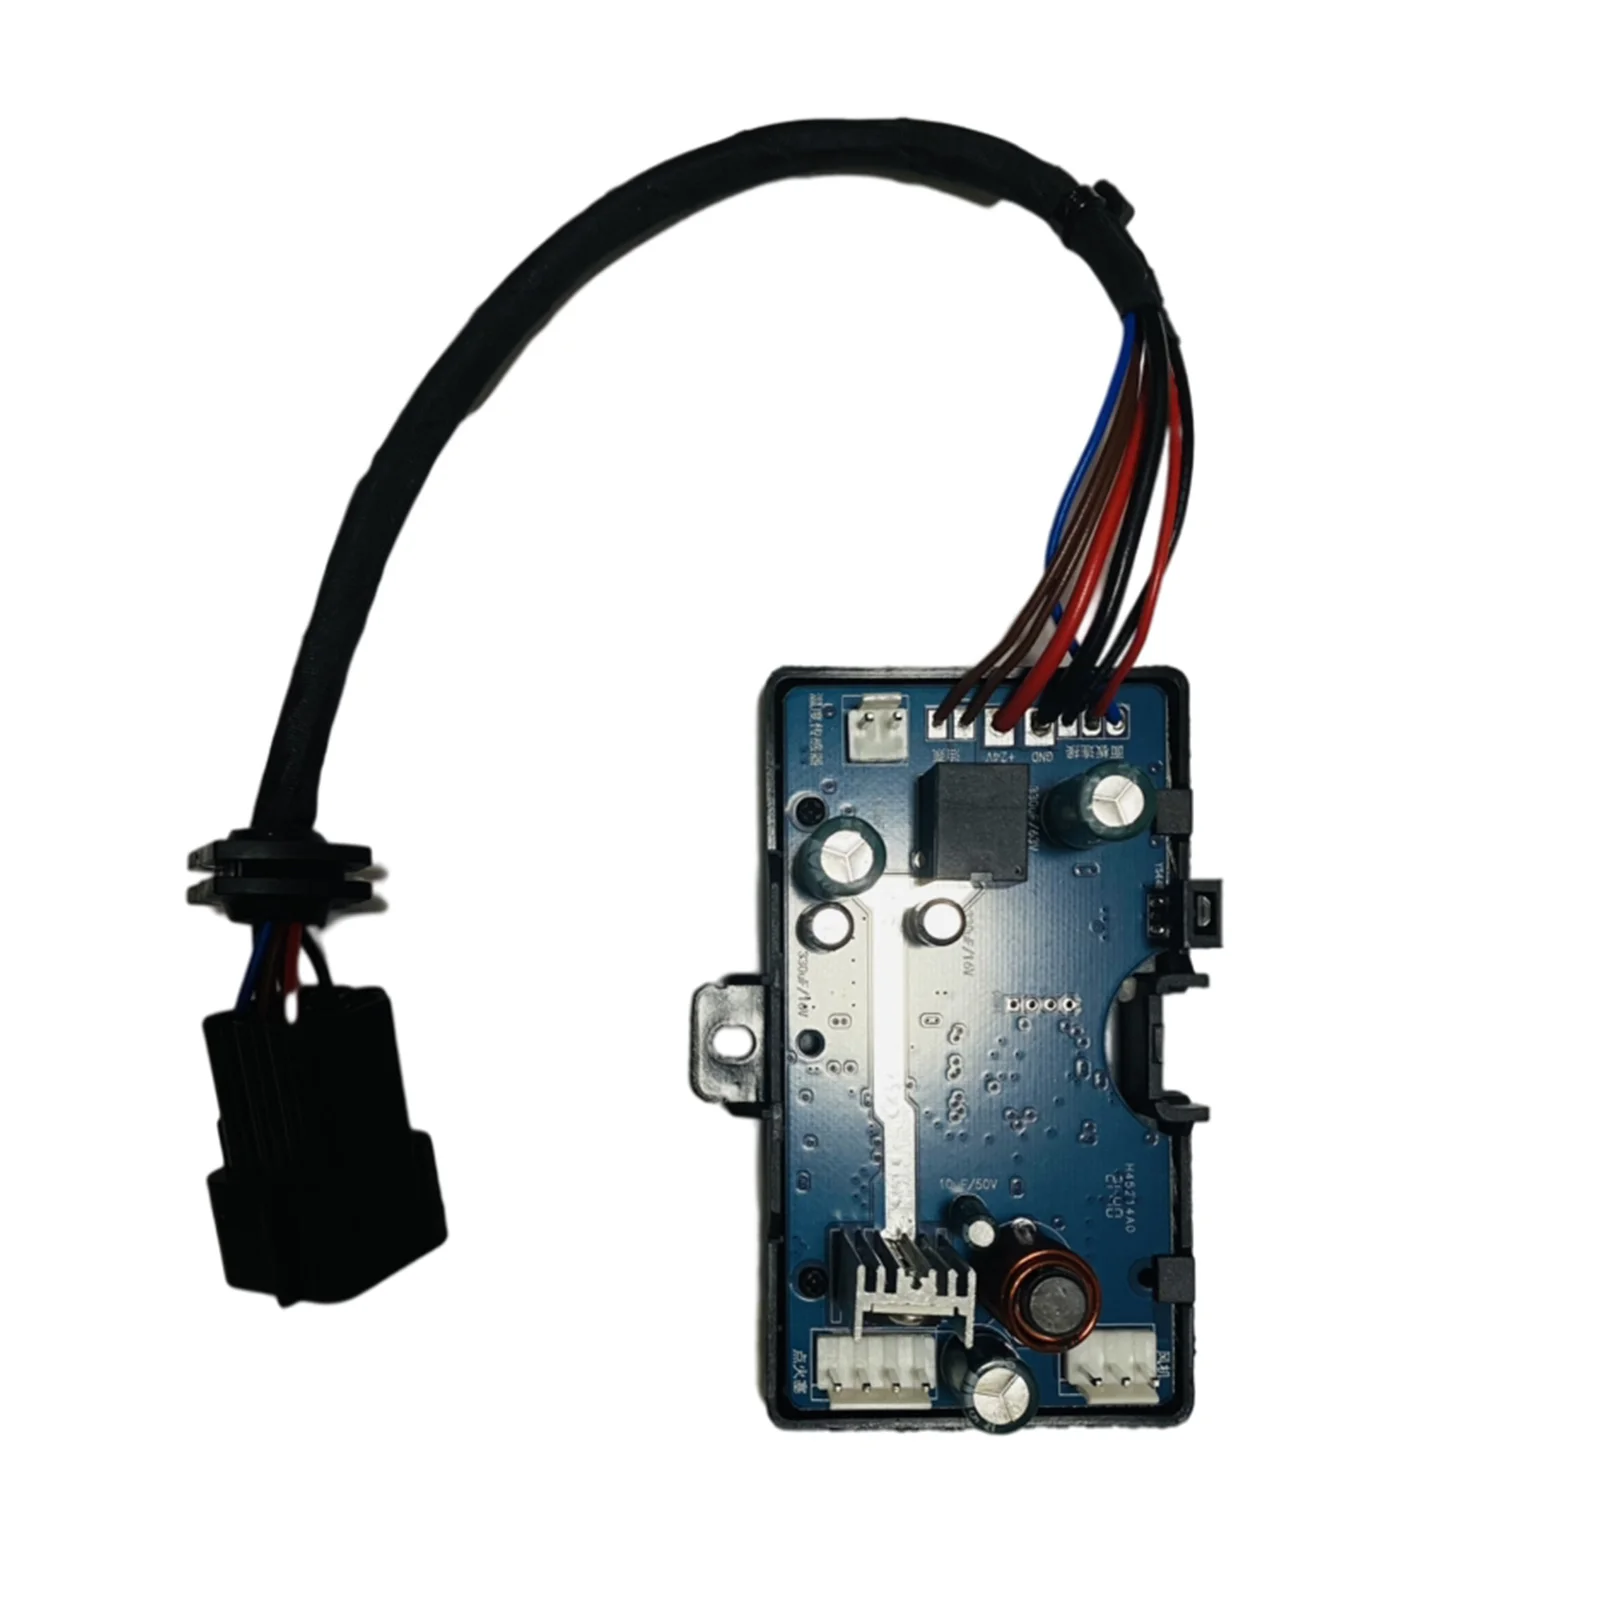 1pc Car Air Diesel Heater Control Board Motherboard For 12V 5KW 8KW Parking  Heater Car Accessories